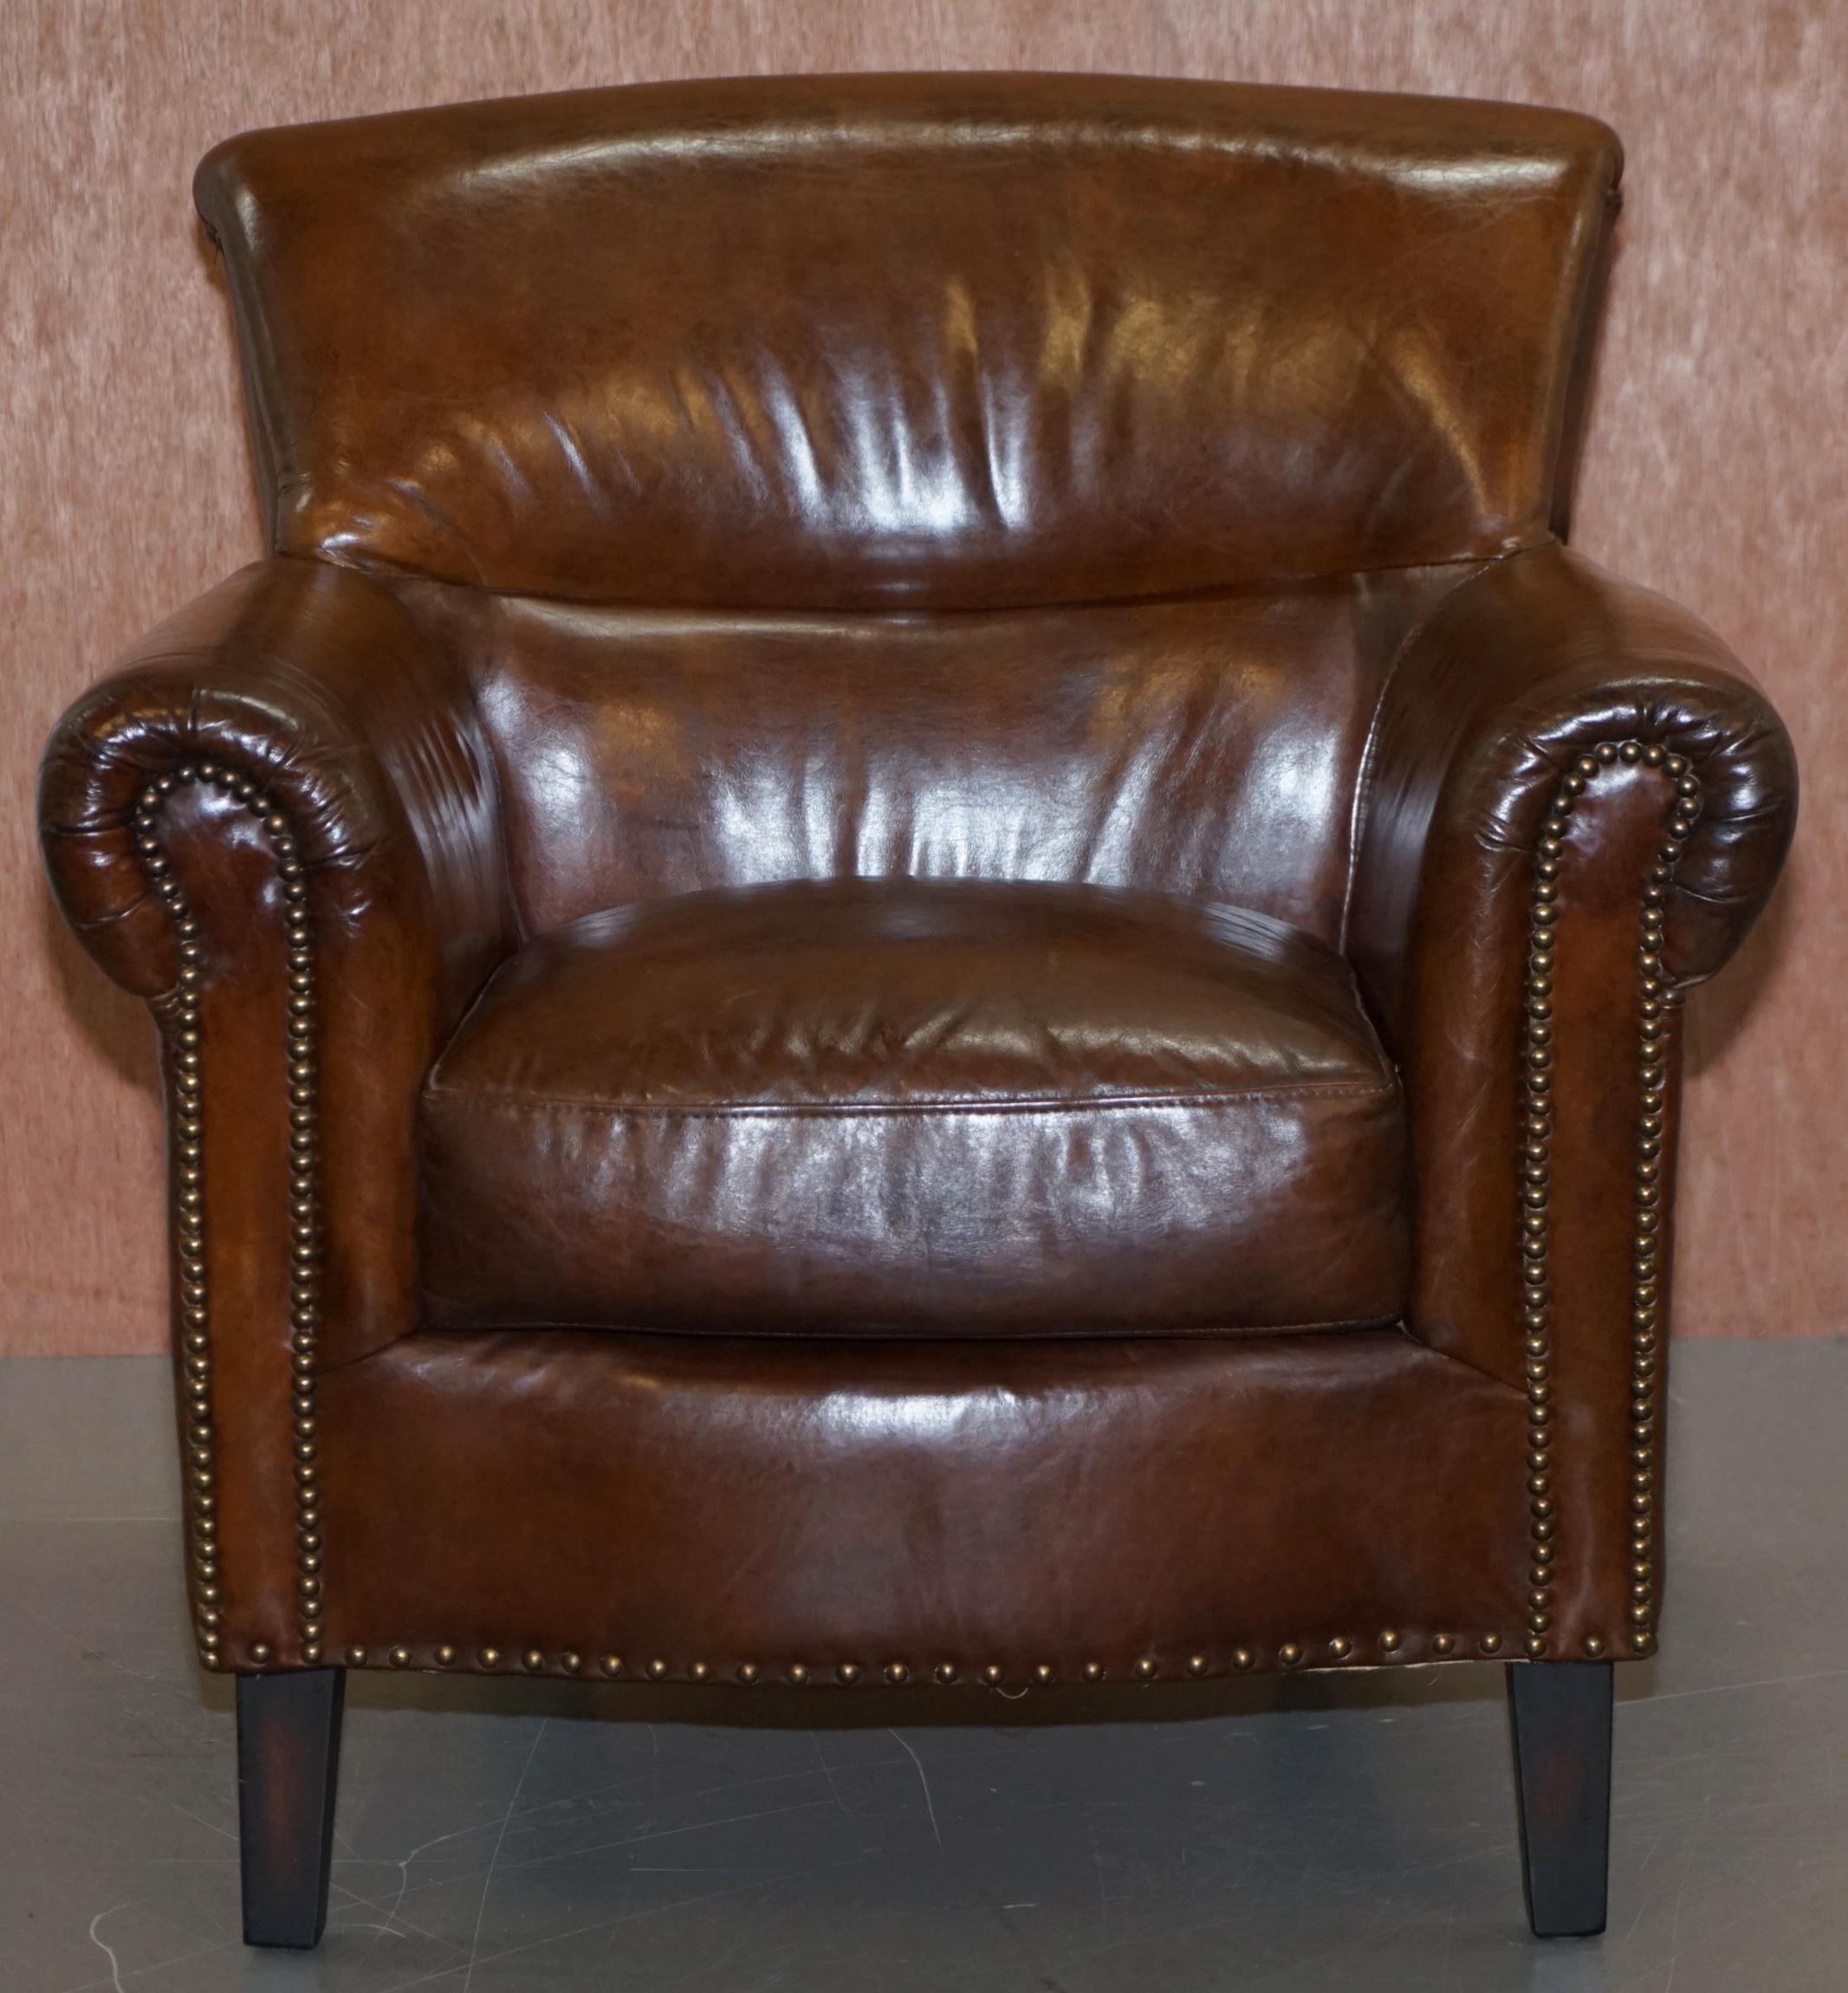 We are delighted to offer for sale this lovely Timothy Oulton designed Halo heritage brown leather armchair

This armchair is part of a large suite

This piece is in lovely order throughout, the leather is designed to look 100+ years old from